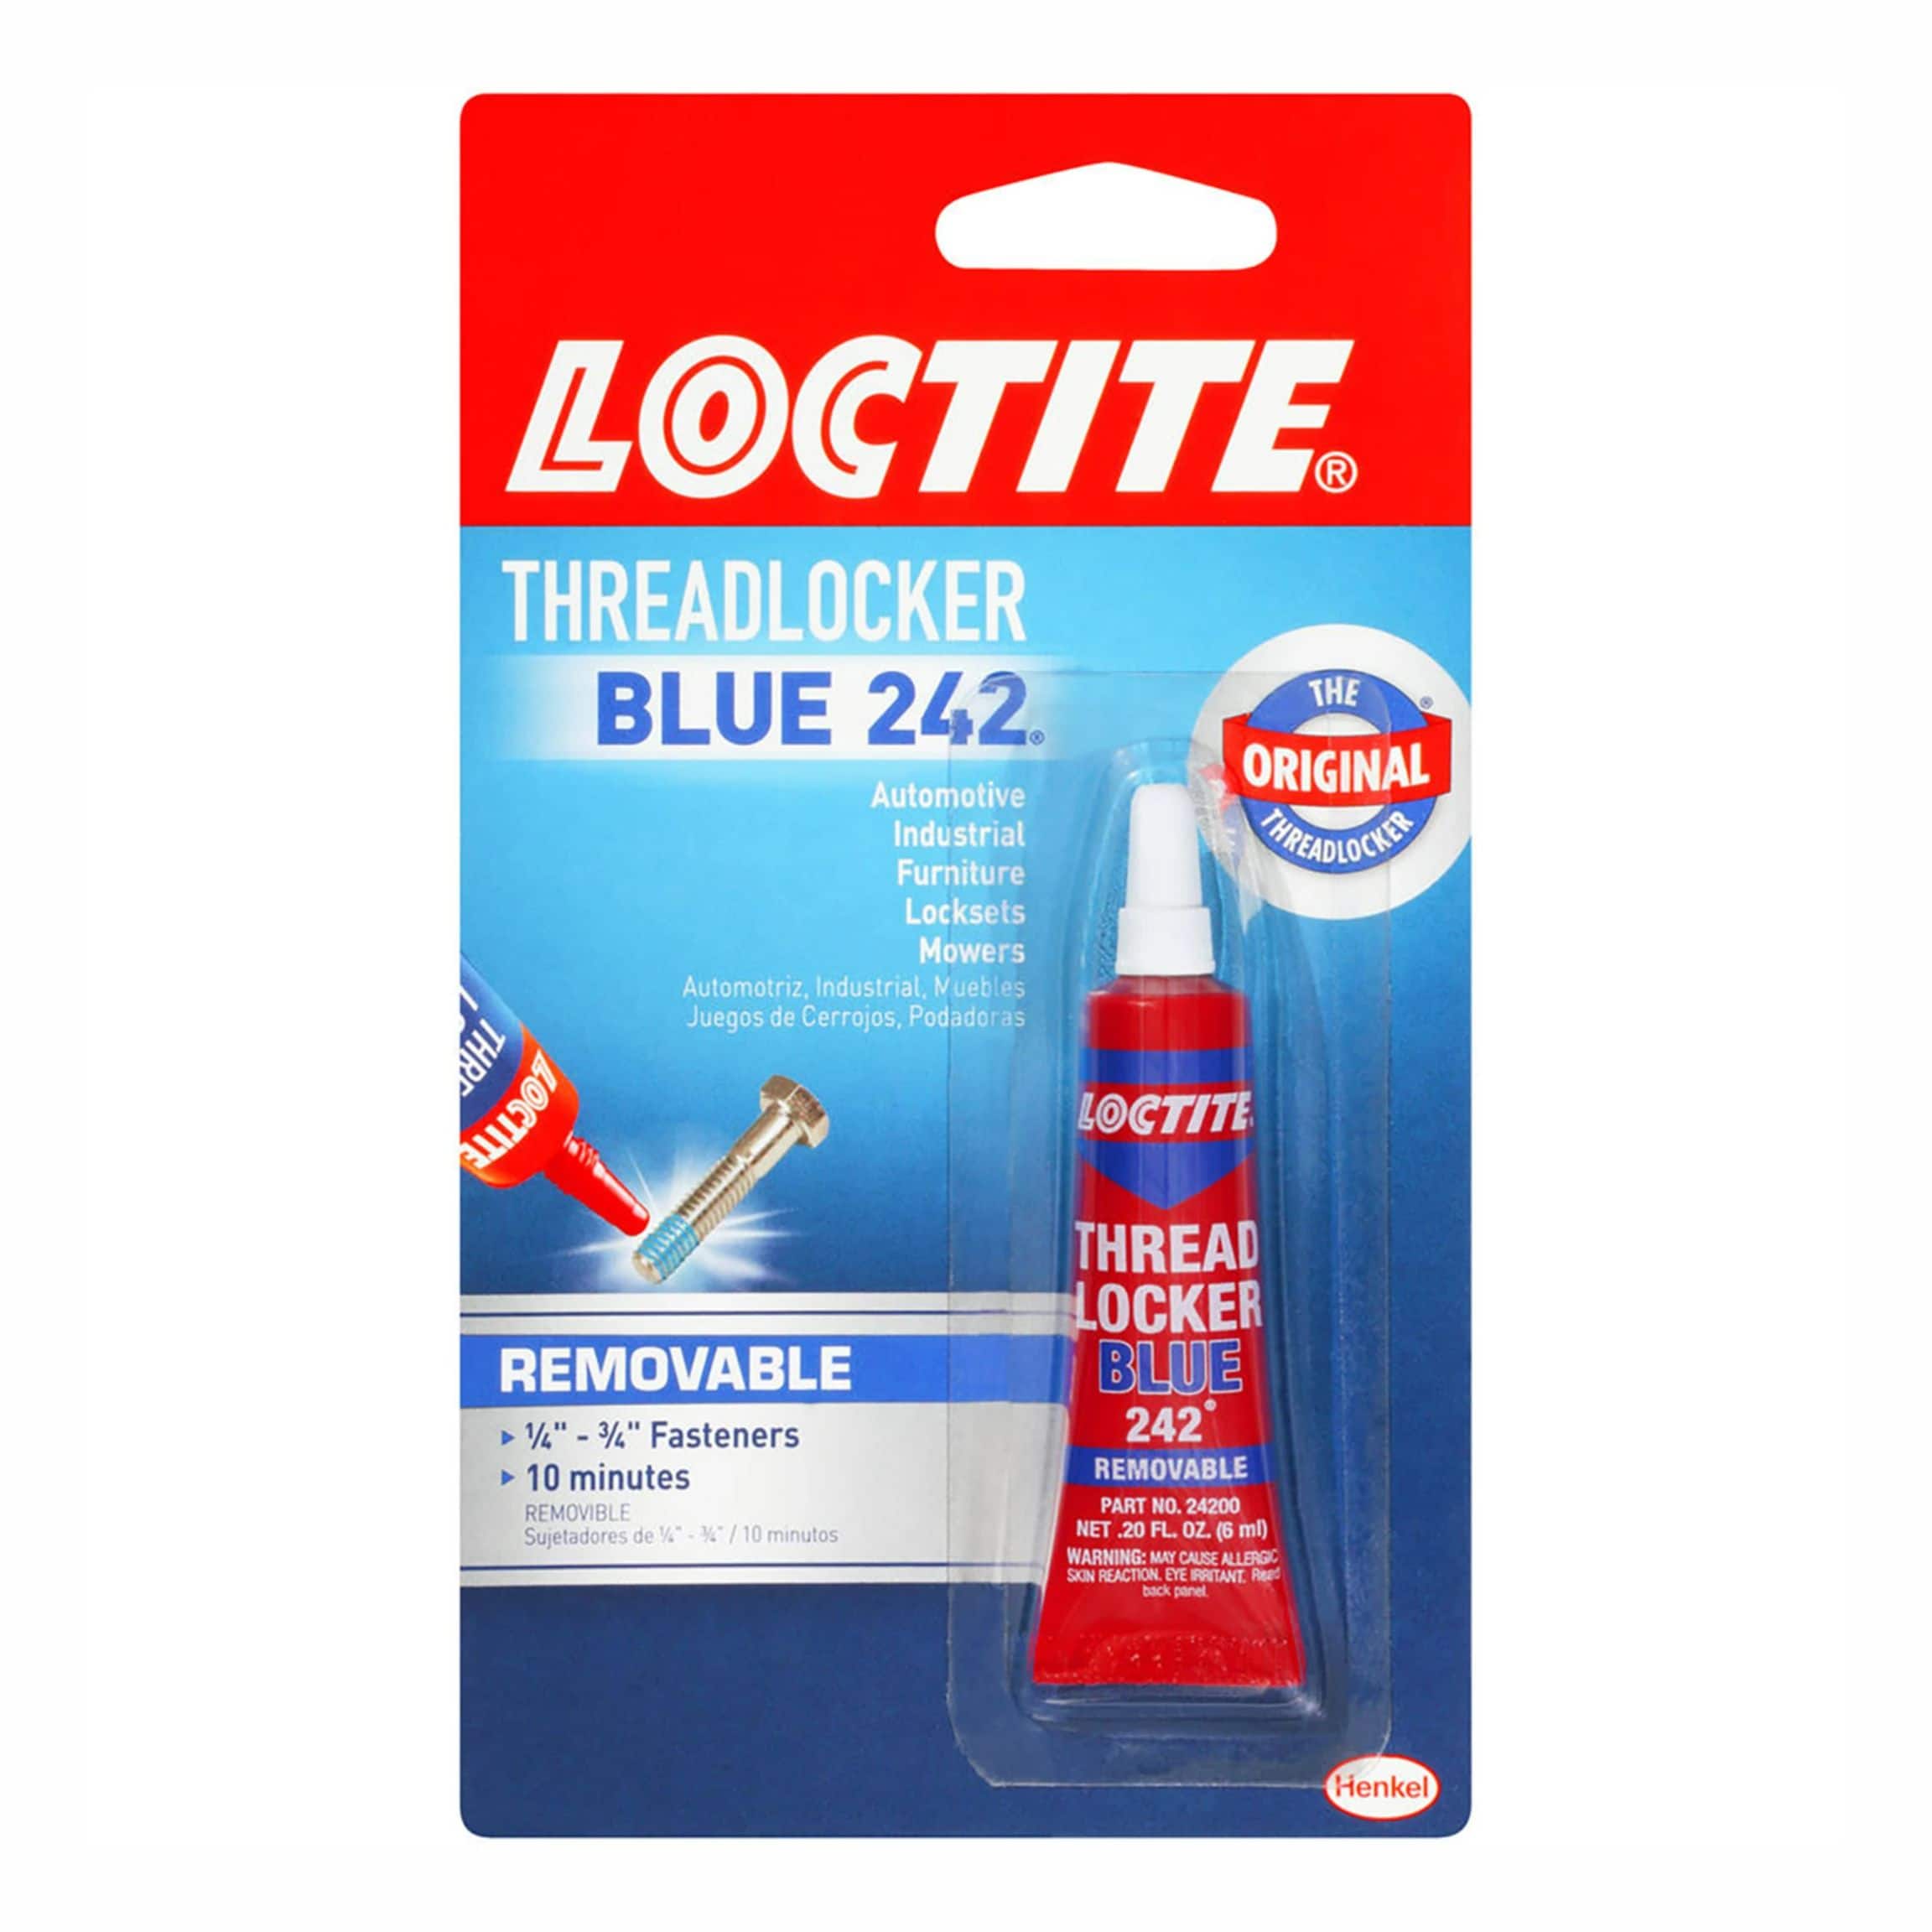 A LOCTITE solution in the food & beverage industry